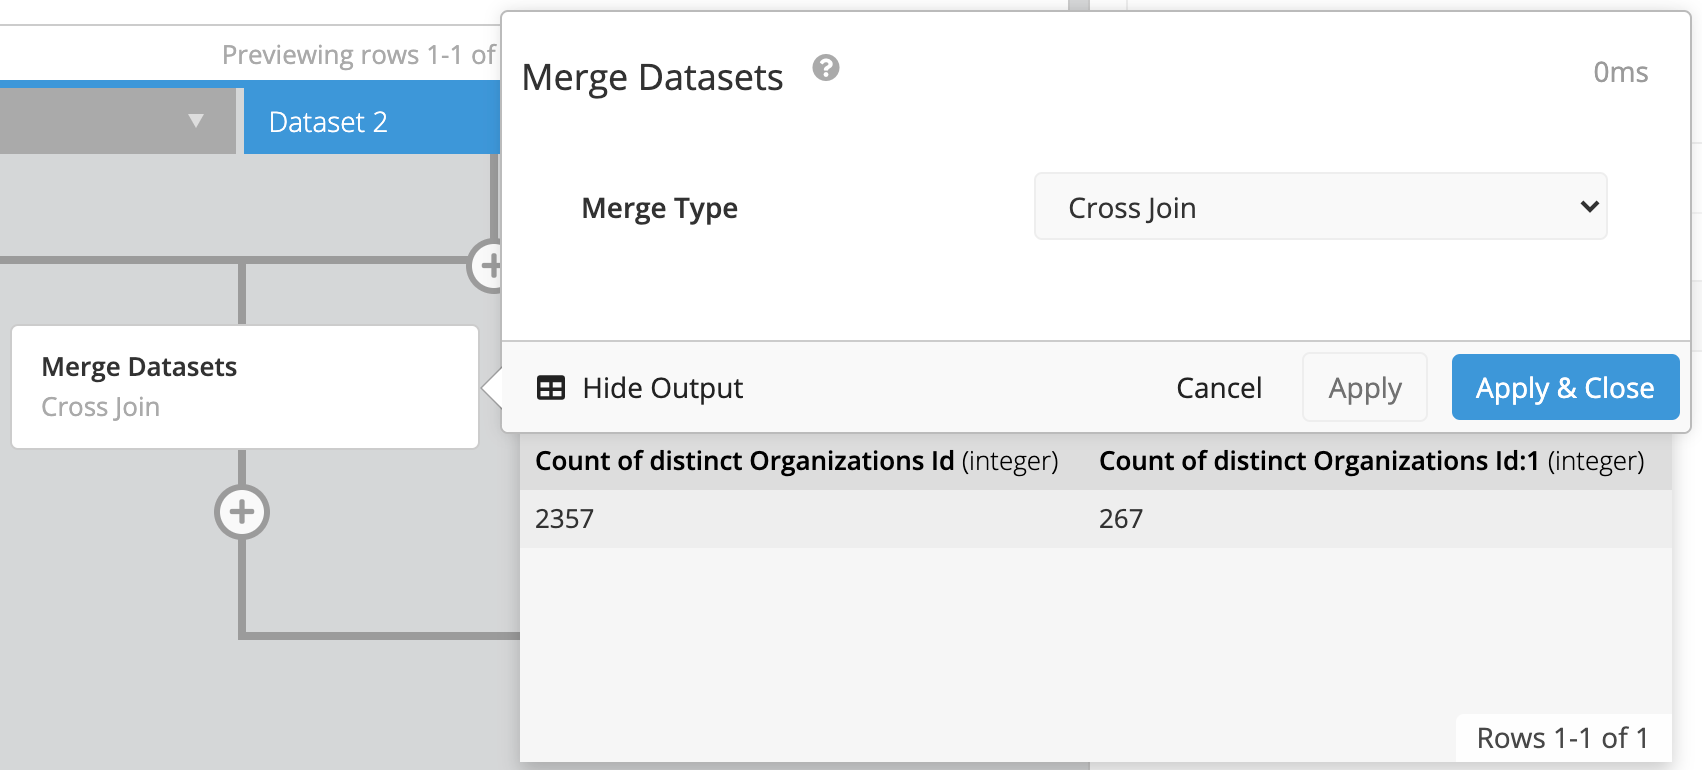 Use Cross Join as the Merge type